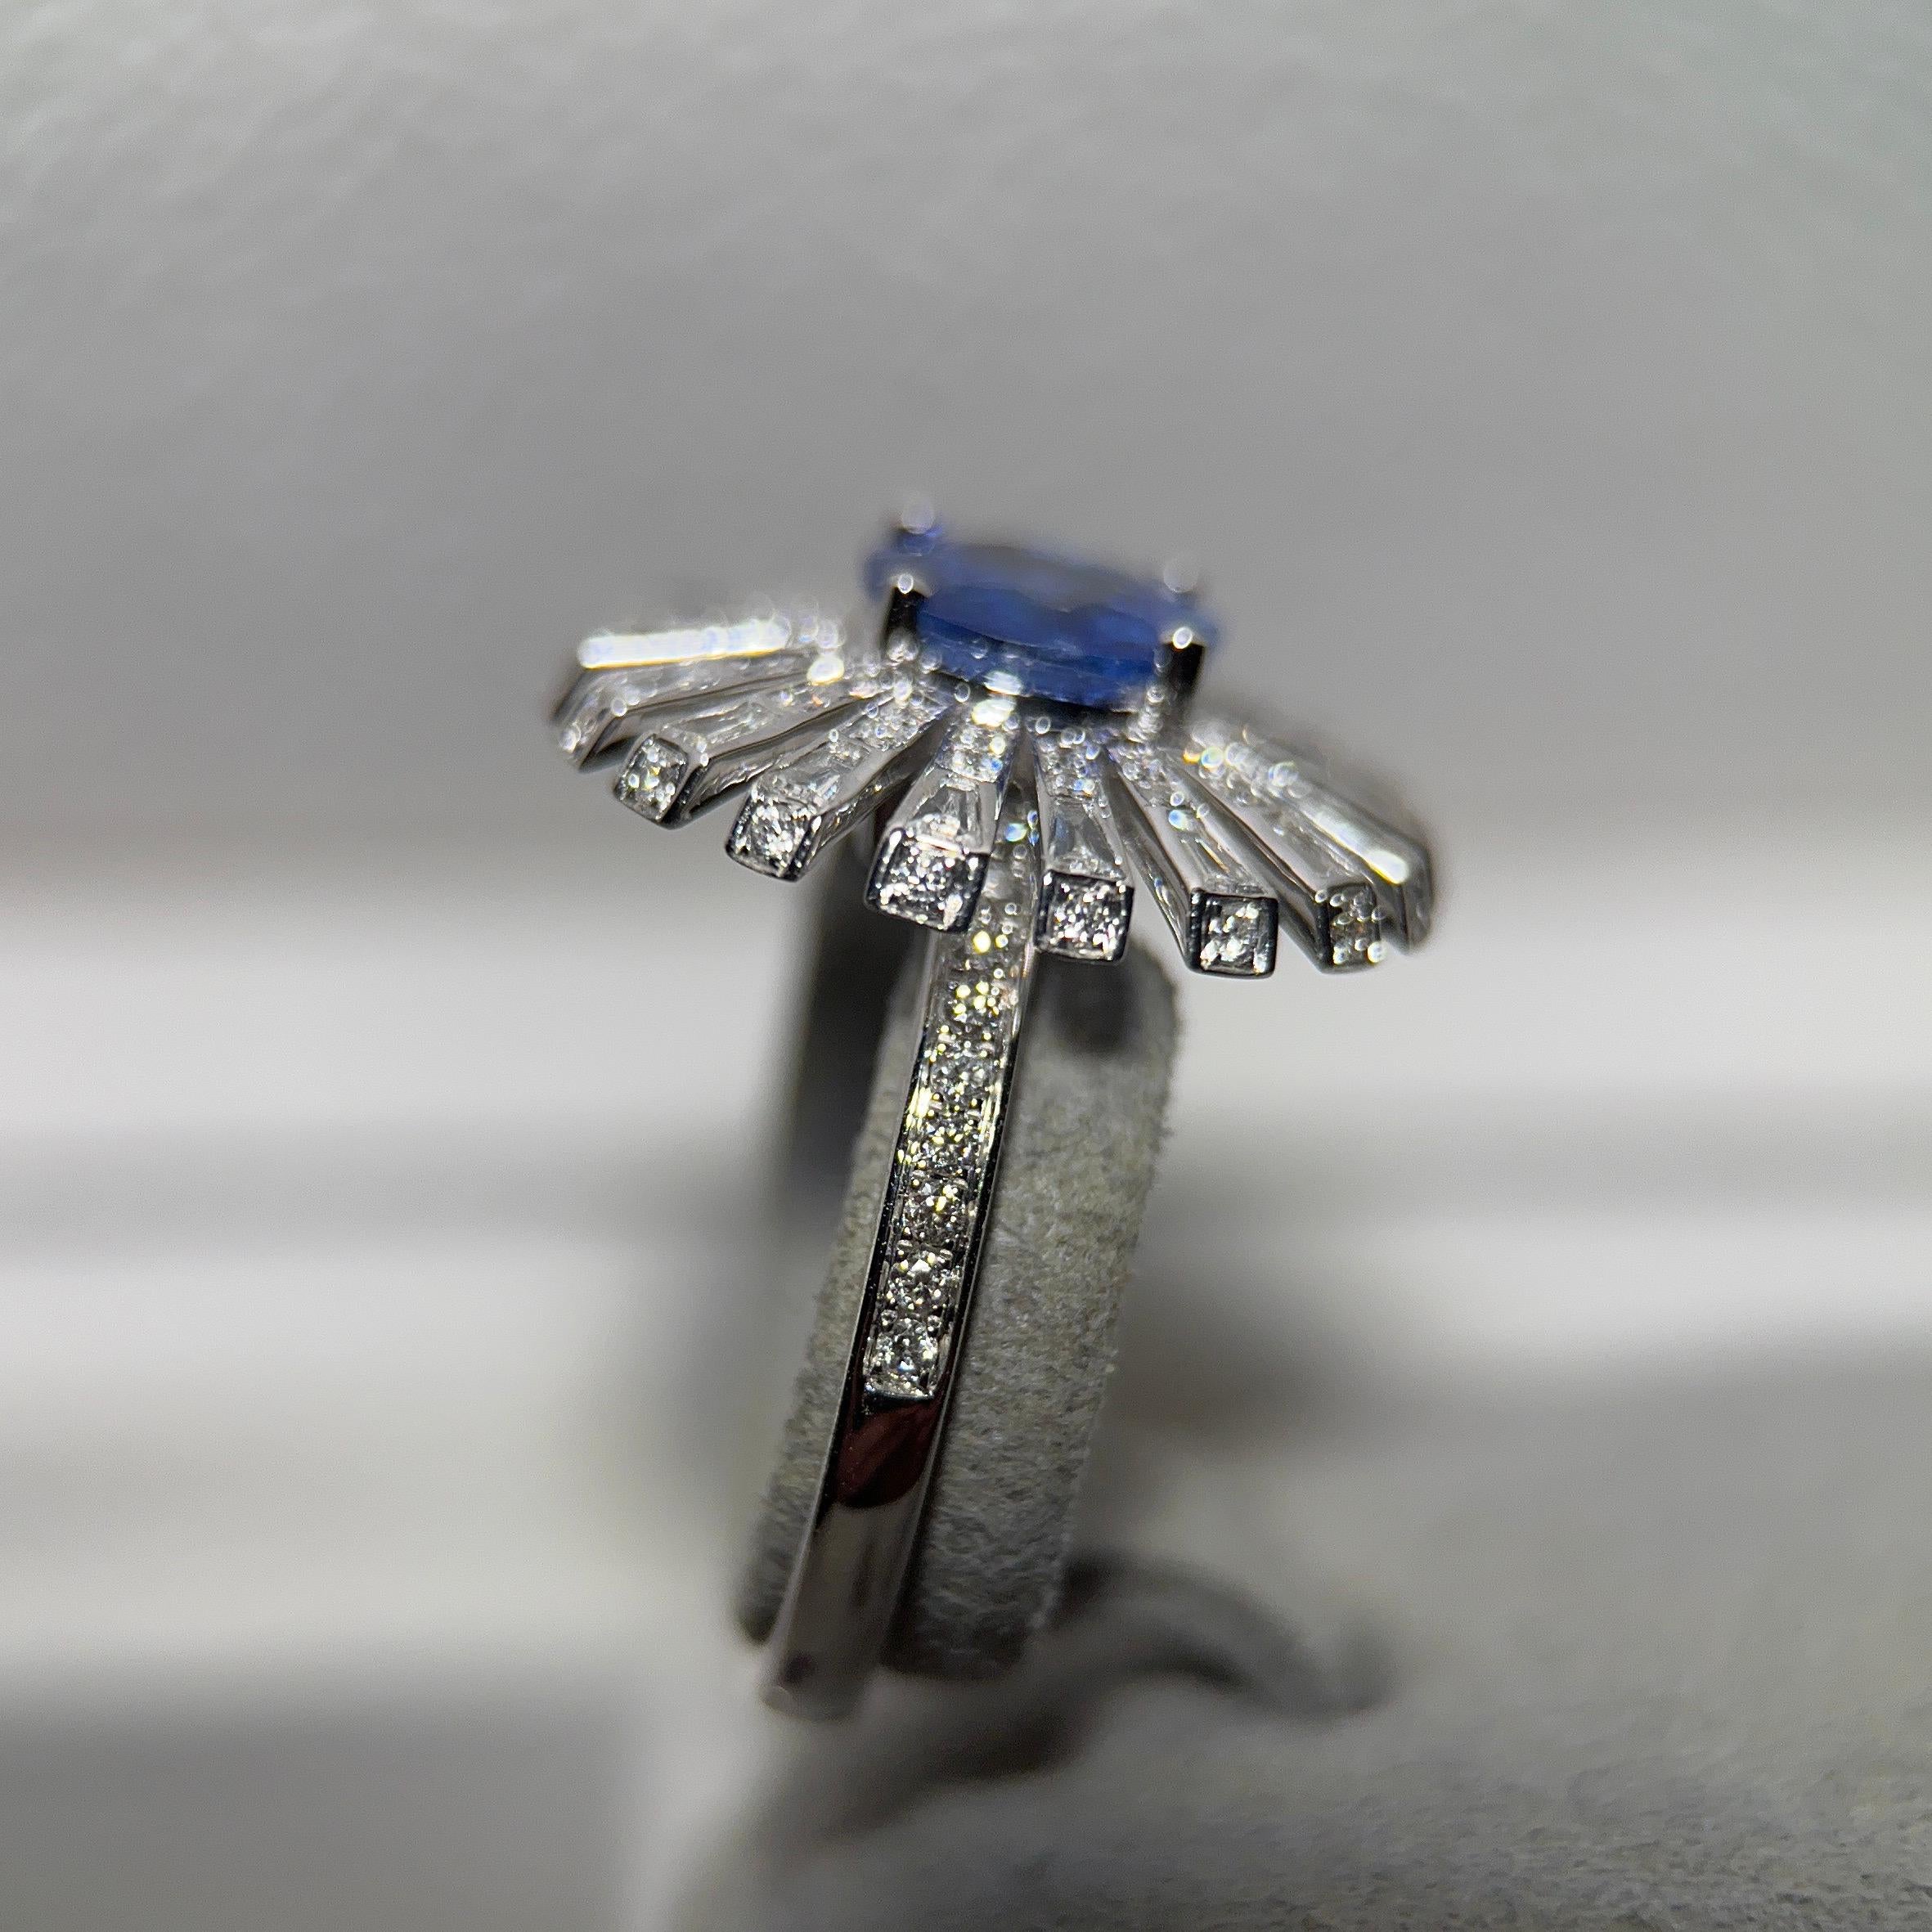 A Blue Sapphire and Diamond Ring in 18k White Gold. The main vivid blue sapphire is secured by 4 white gold claws and the band of the ring is made up of 1 lines of diamond pave.

US Ring Size 6.25
The weight of the main sapphire is 1.66 ct
Total